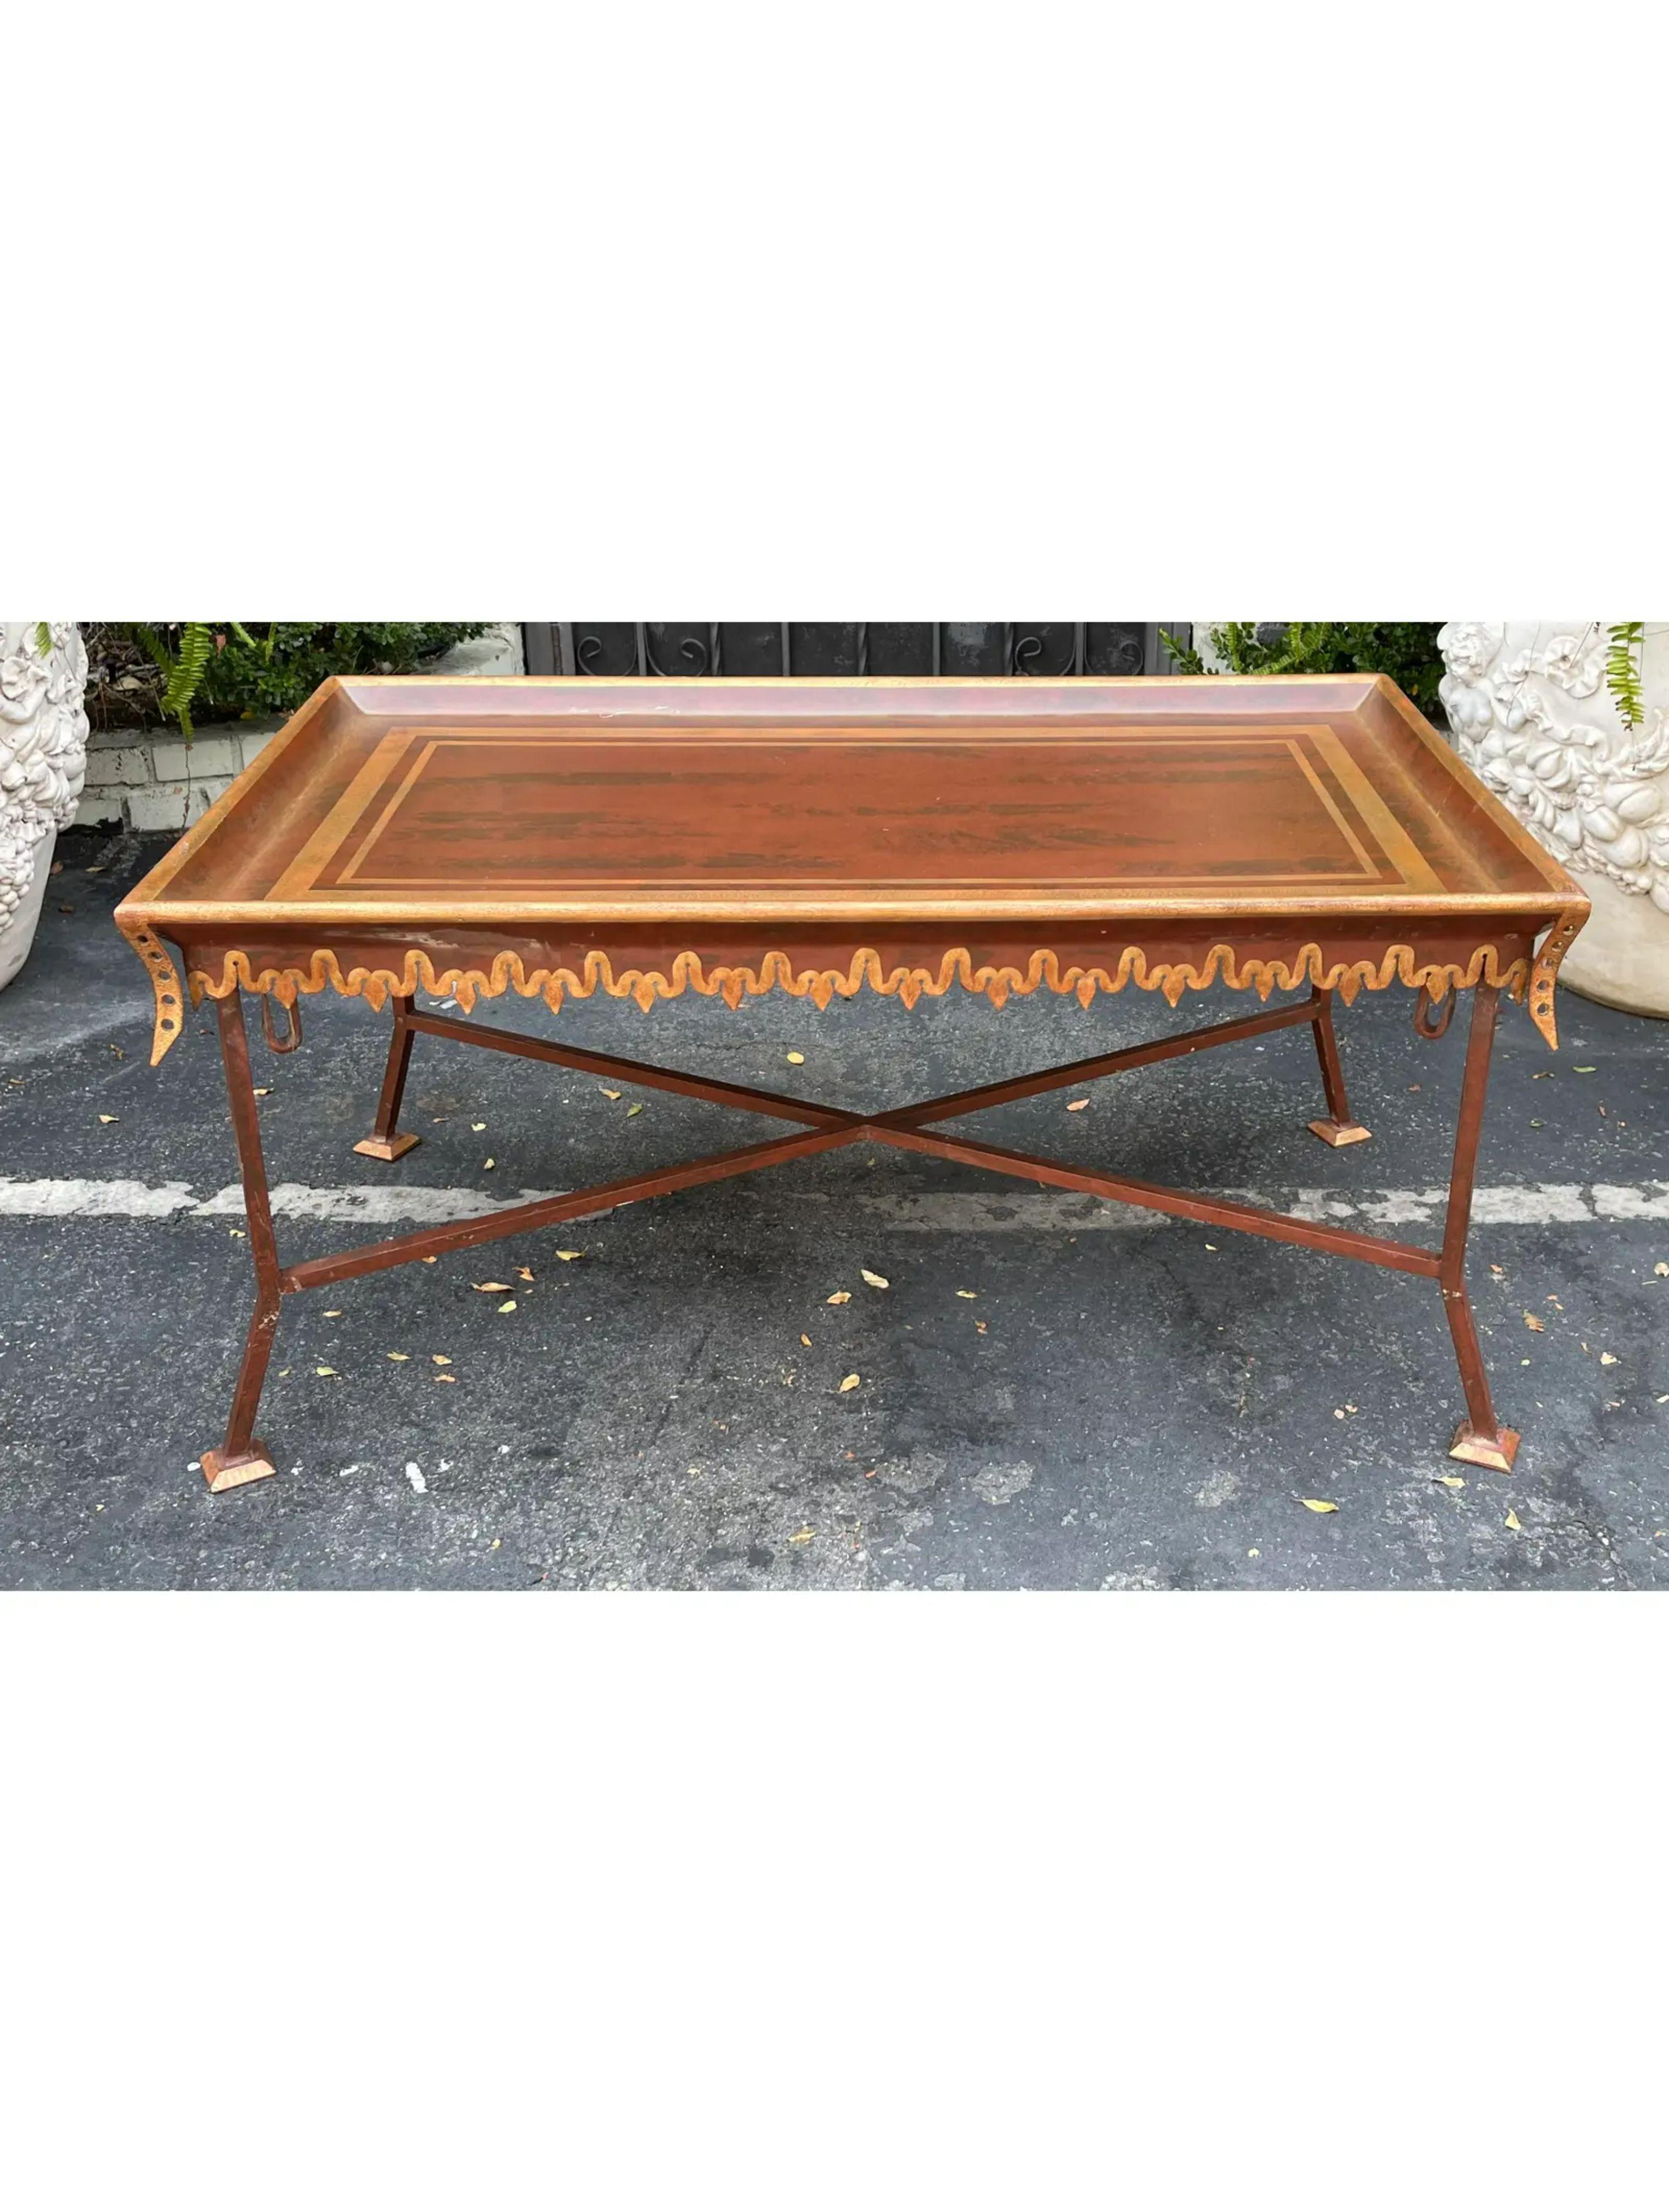 Minton Spidell Regency Style Las Palmas Collection Parcel Gilt And Red Painted Tole & Wrought Iron Coffee Table

Additional information: 
Materials: Paint, Tole, Wrought Iron
Color: Red
Brand: Minton-Spidell
Designer: Minton-Spidell
Period: